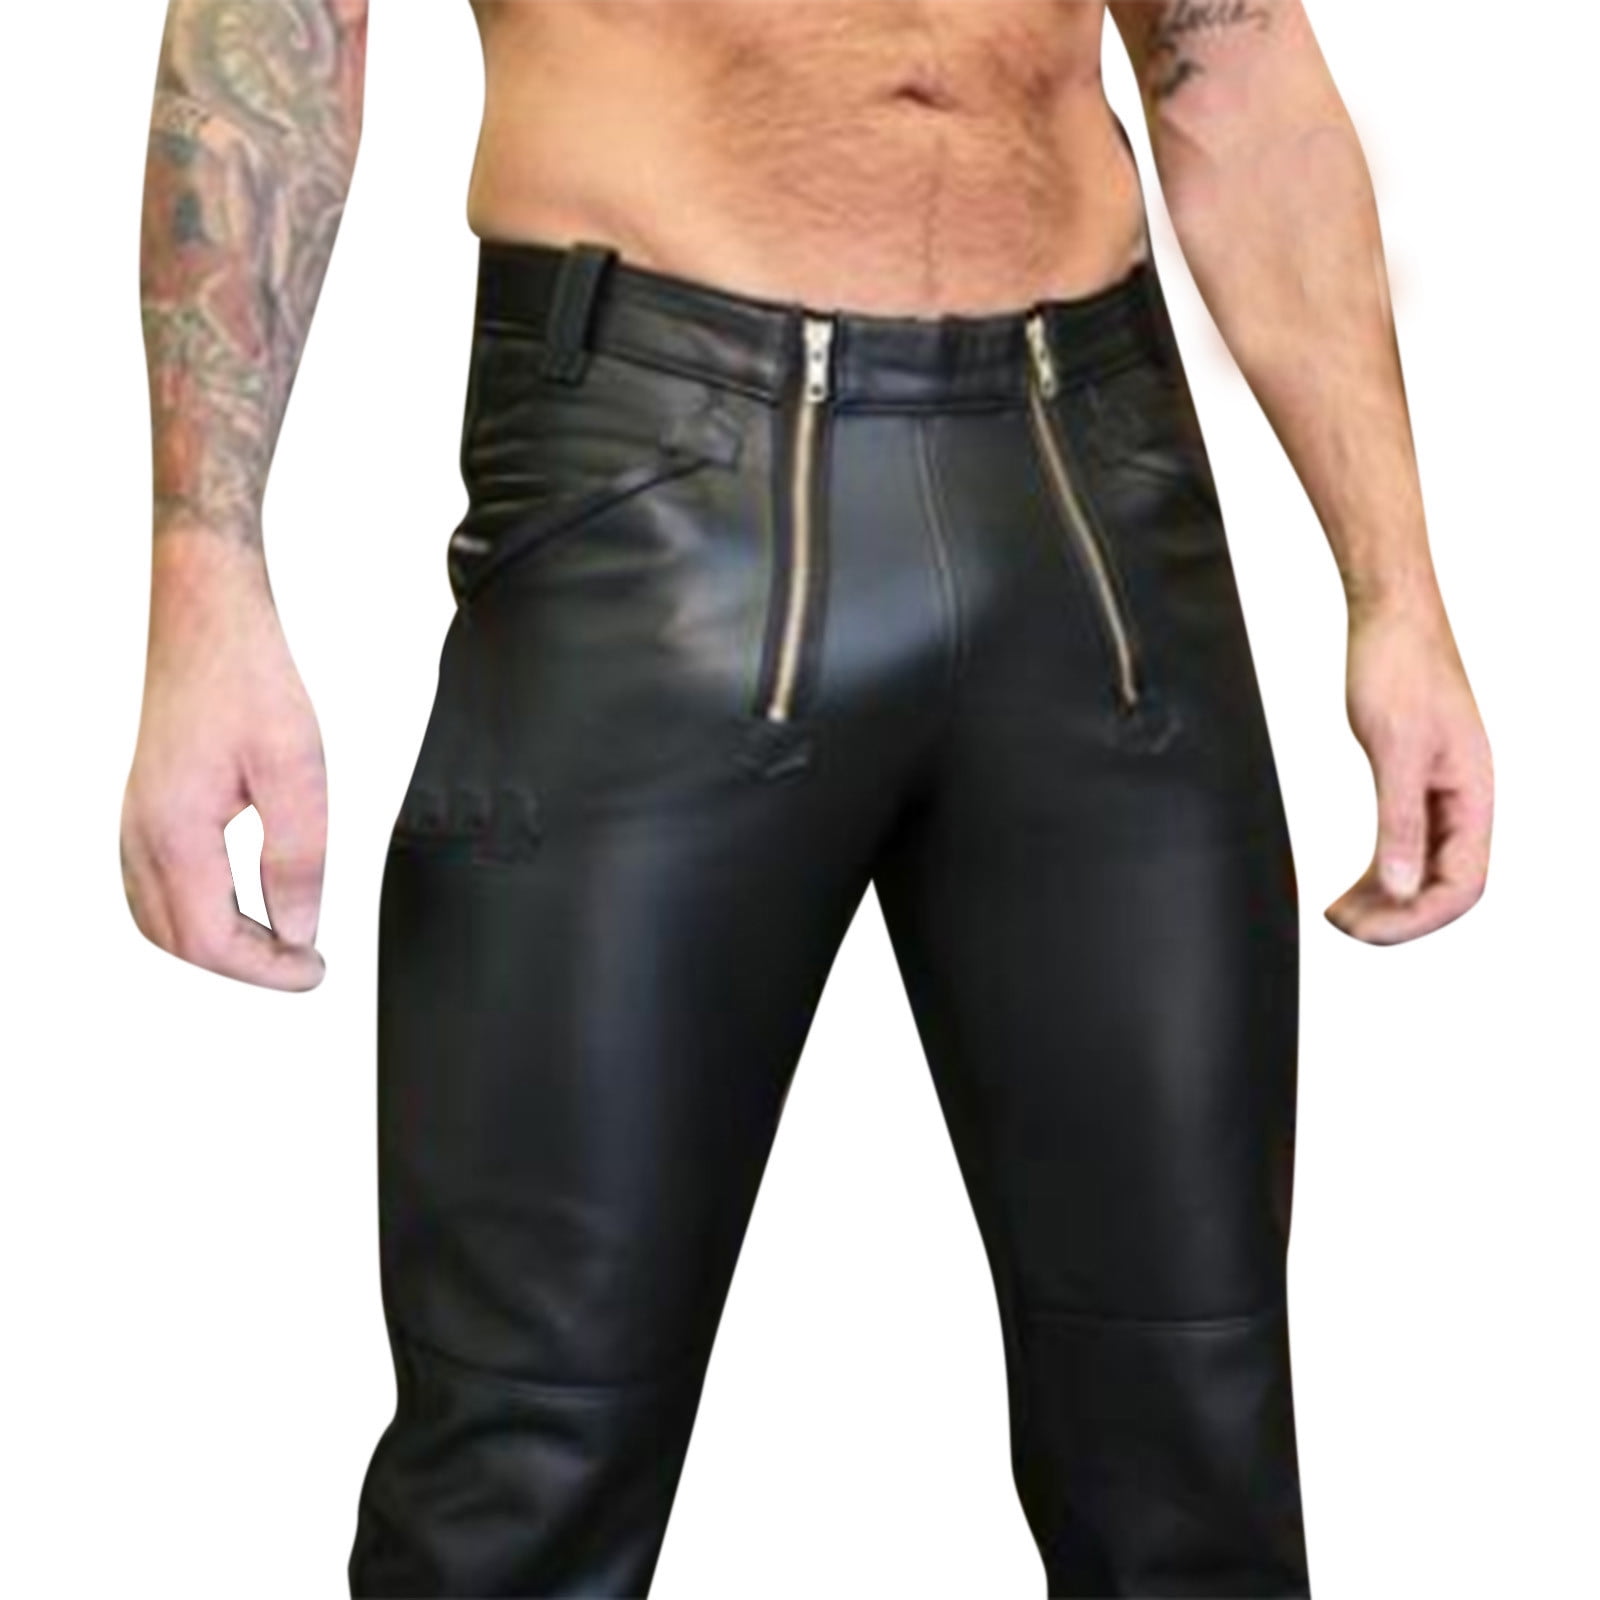 Skinny Men's Leather Pants | Stylish and Comfortable